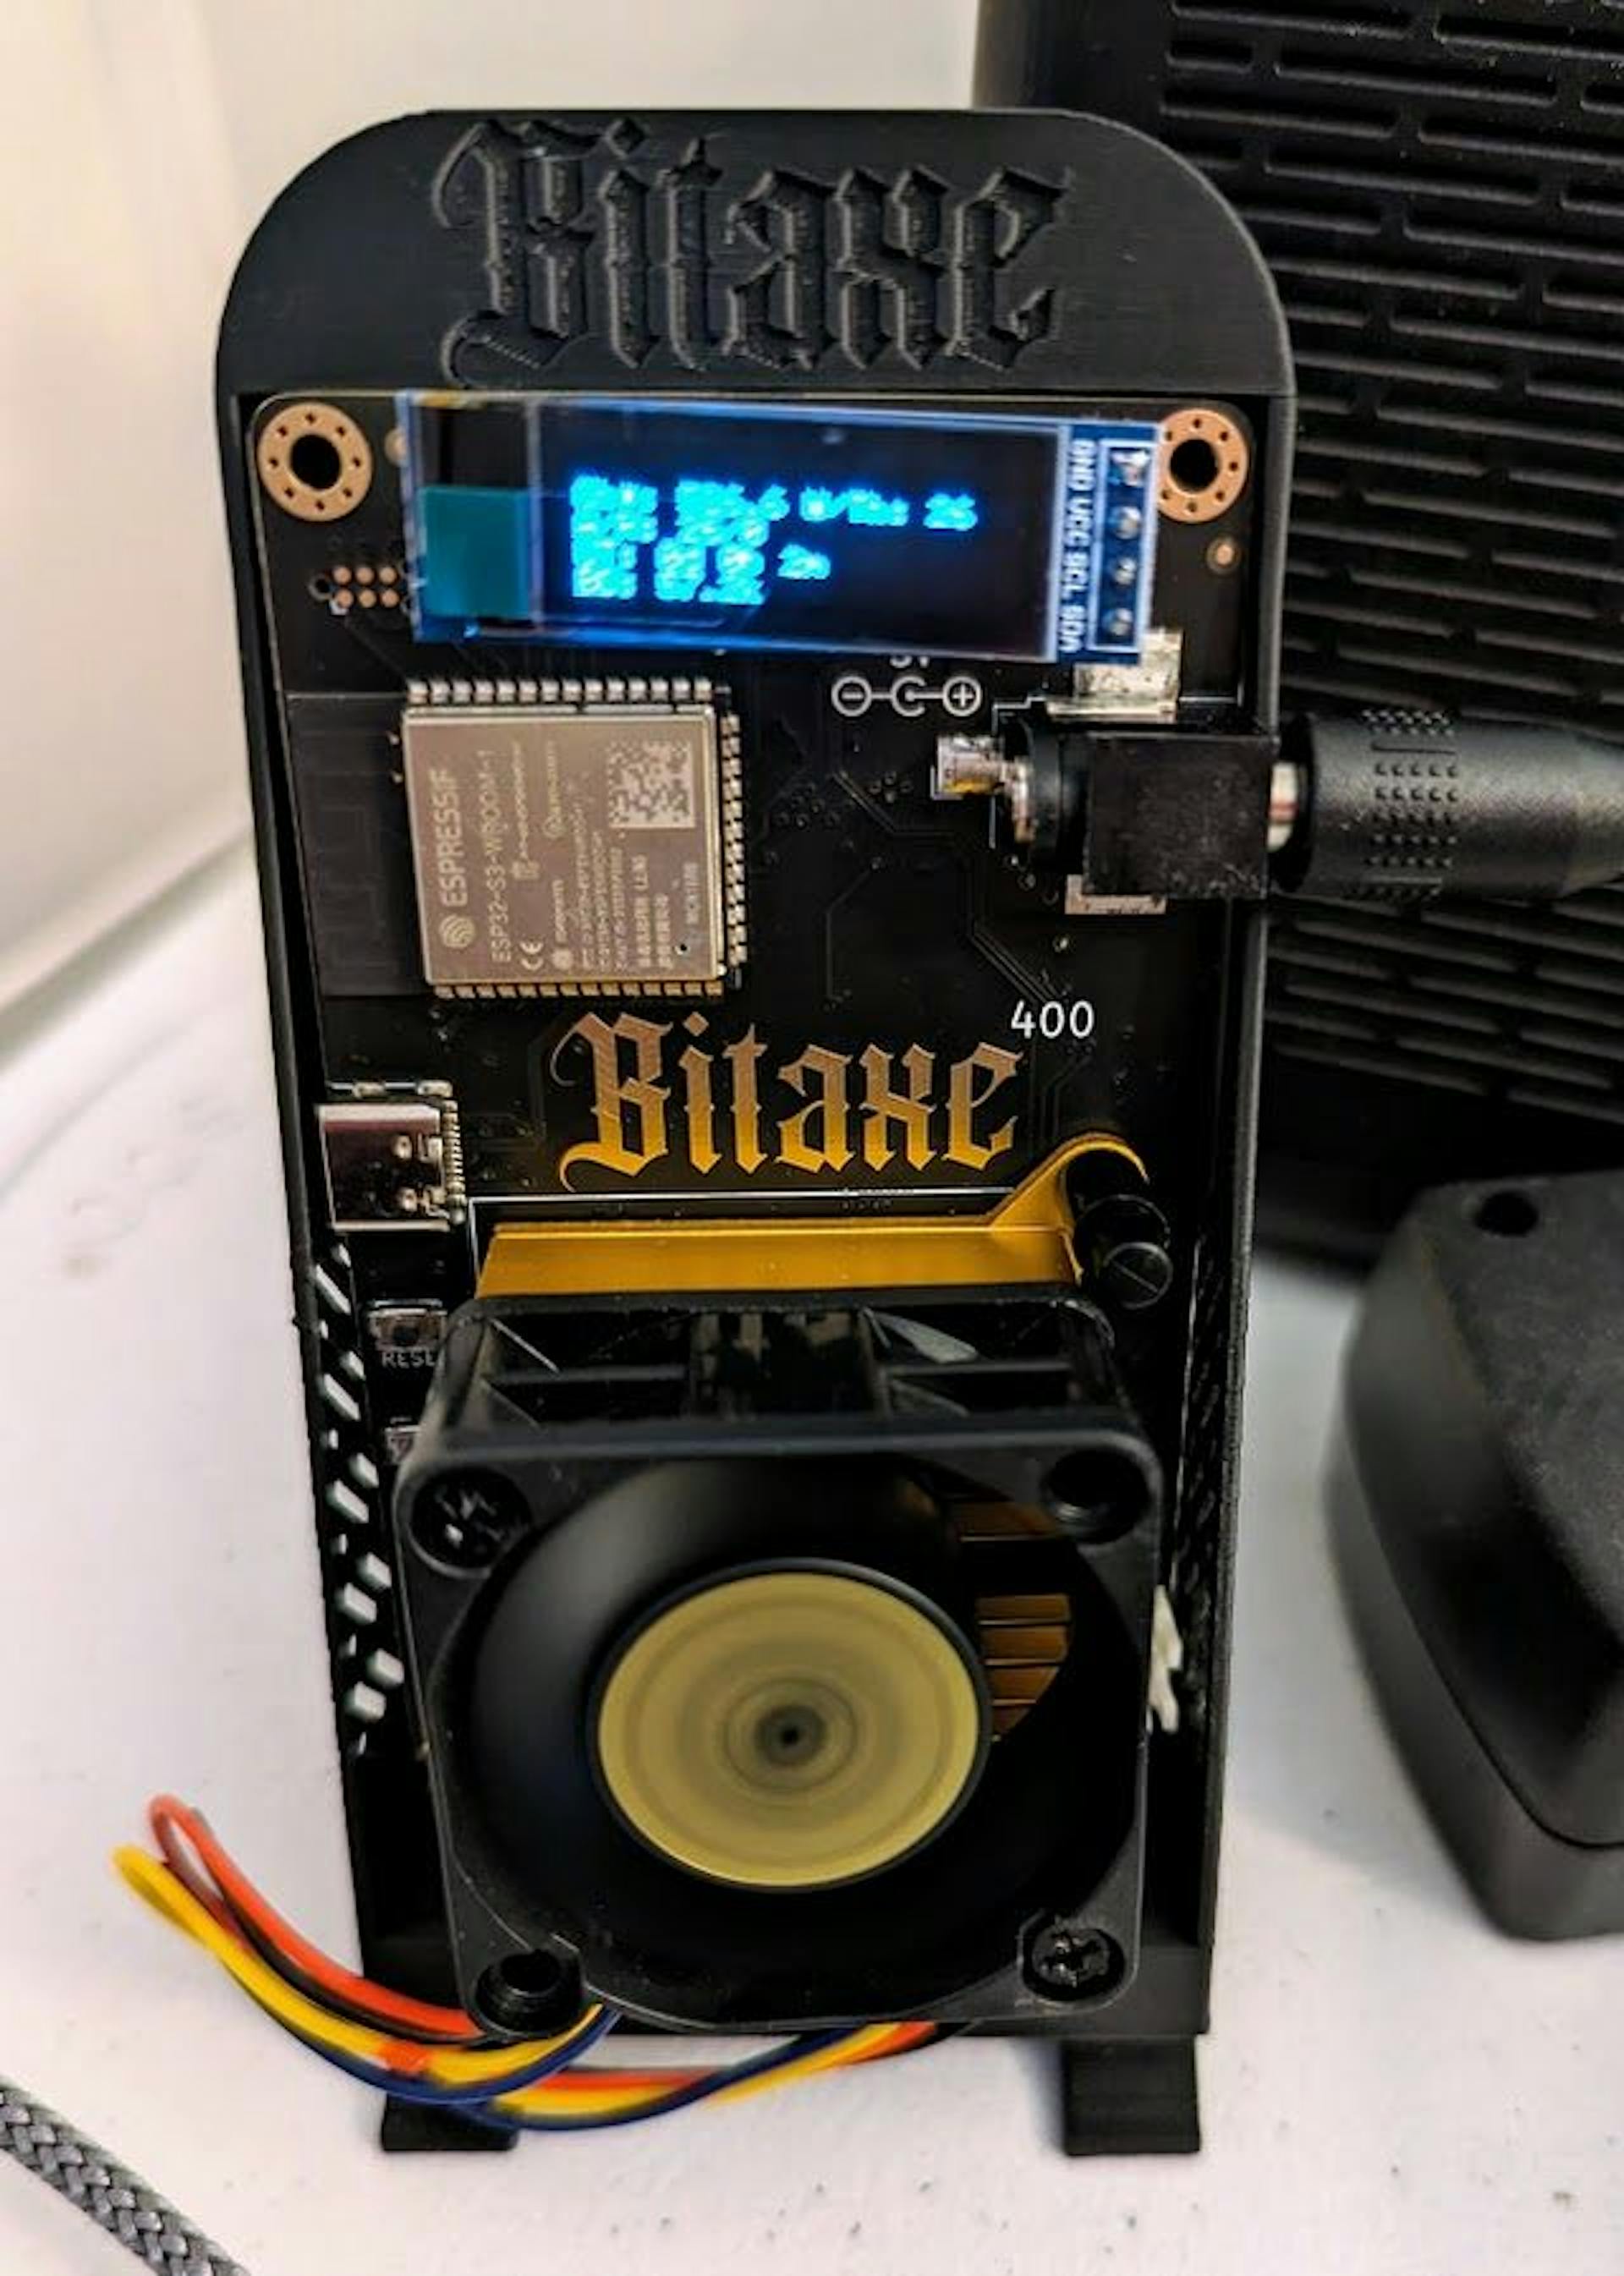 A Bitaxe Supra delivering 700 GH on the Author's Desktop